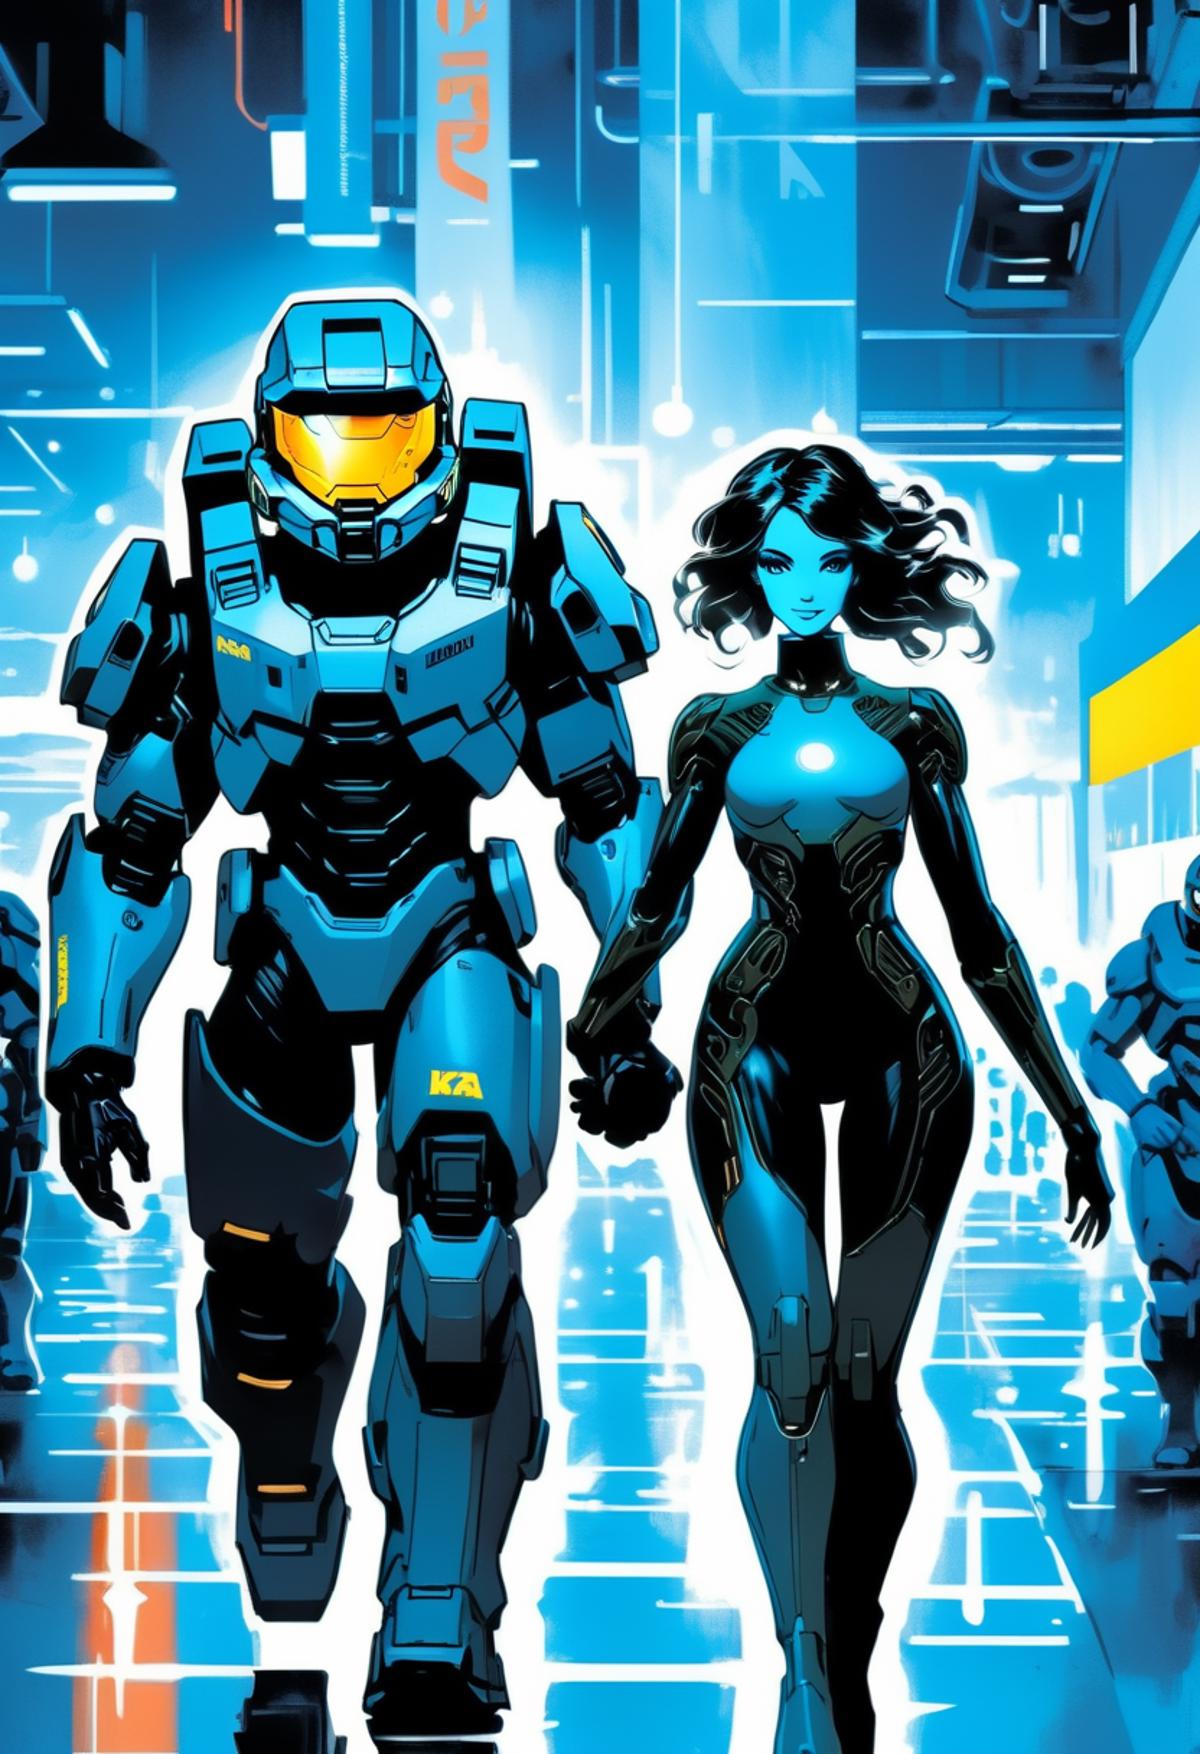 A man and a woman in futuristic armor walking together in a corridor.